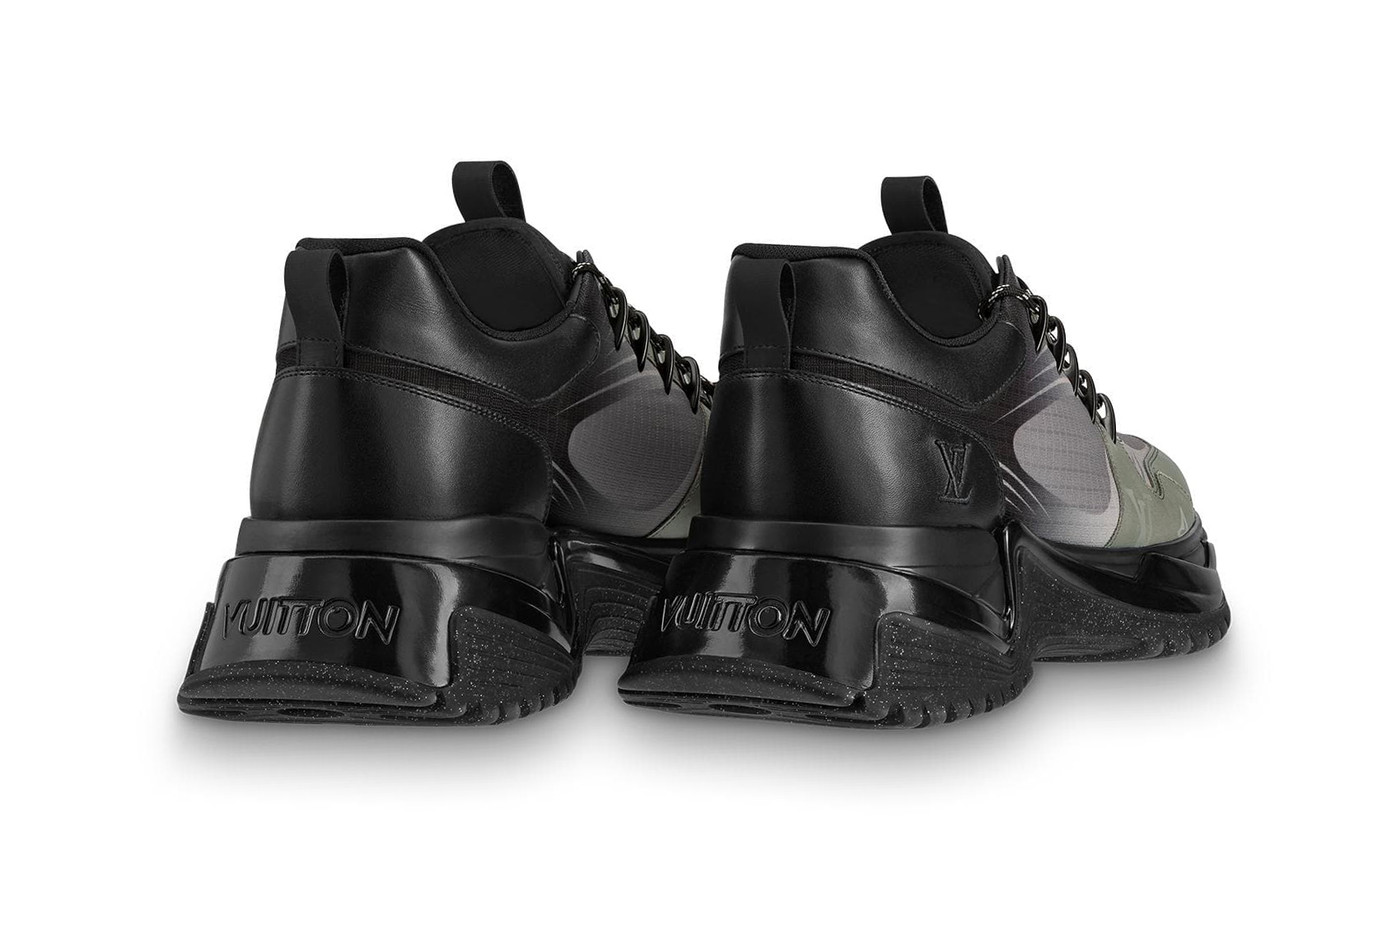 How Are We Feeling About These New Louis Vuitton Run Away Pulse Sneakers? -  The Source